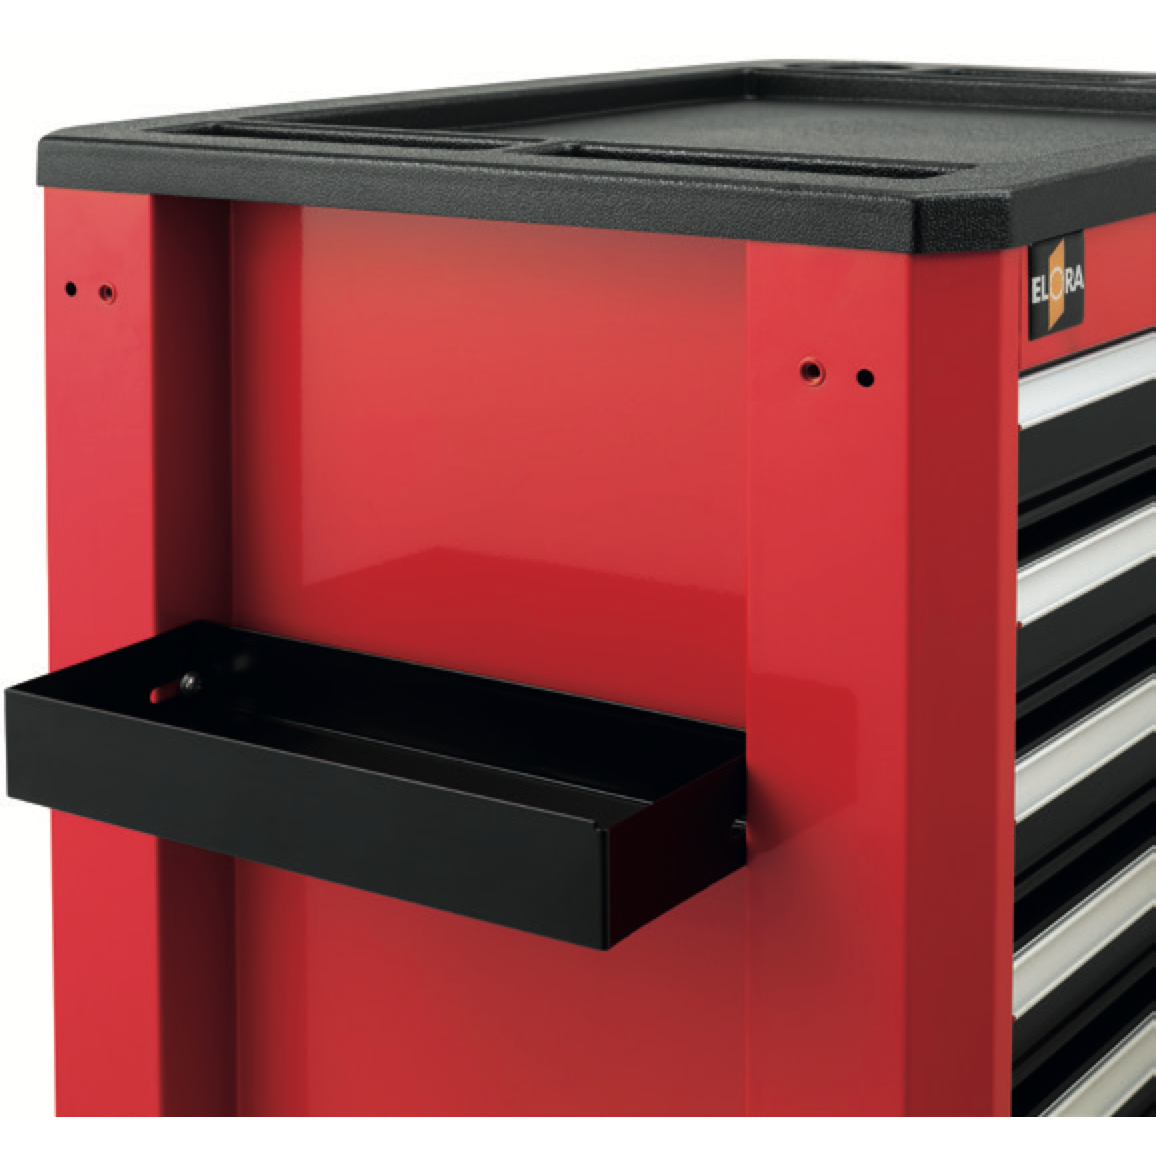 ELORA 1210-SD Foldable Tray Accessories Roller Tool Cabinet - Premium Roller Tool Cabinet from ELORA - Shop now at Yew Aik.